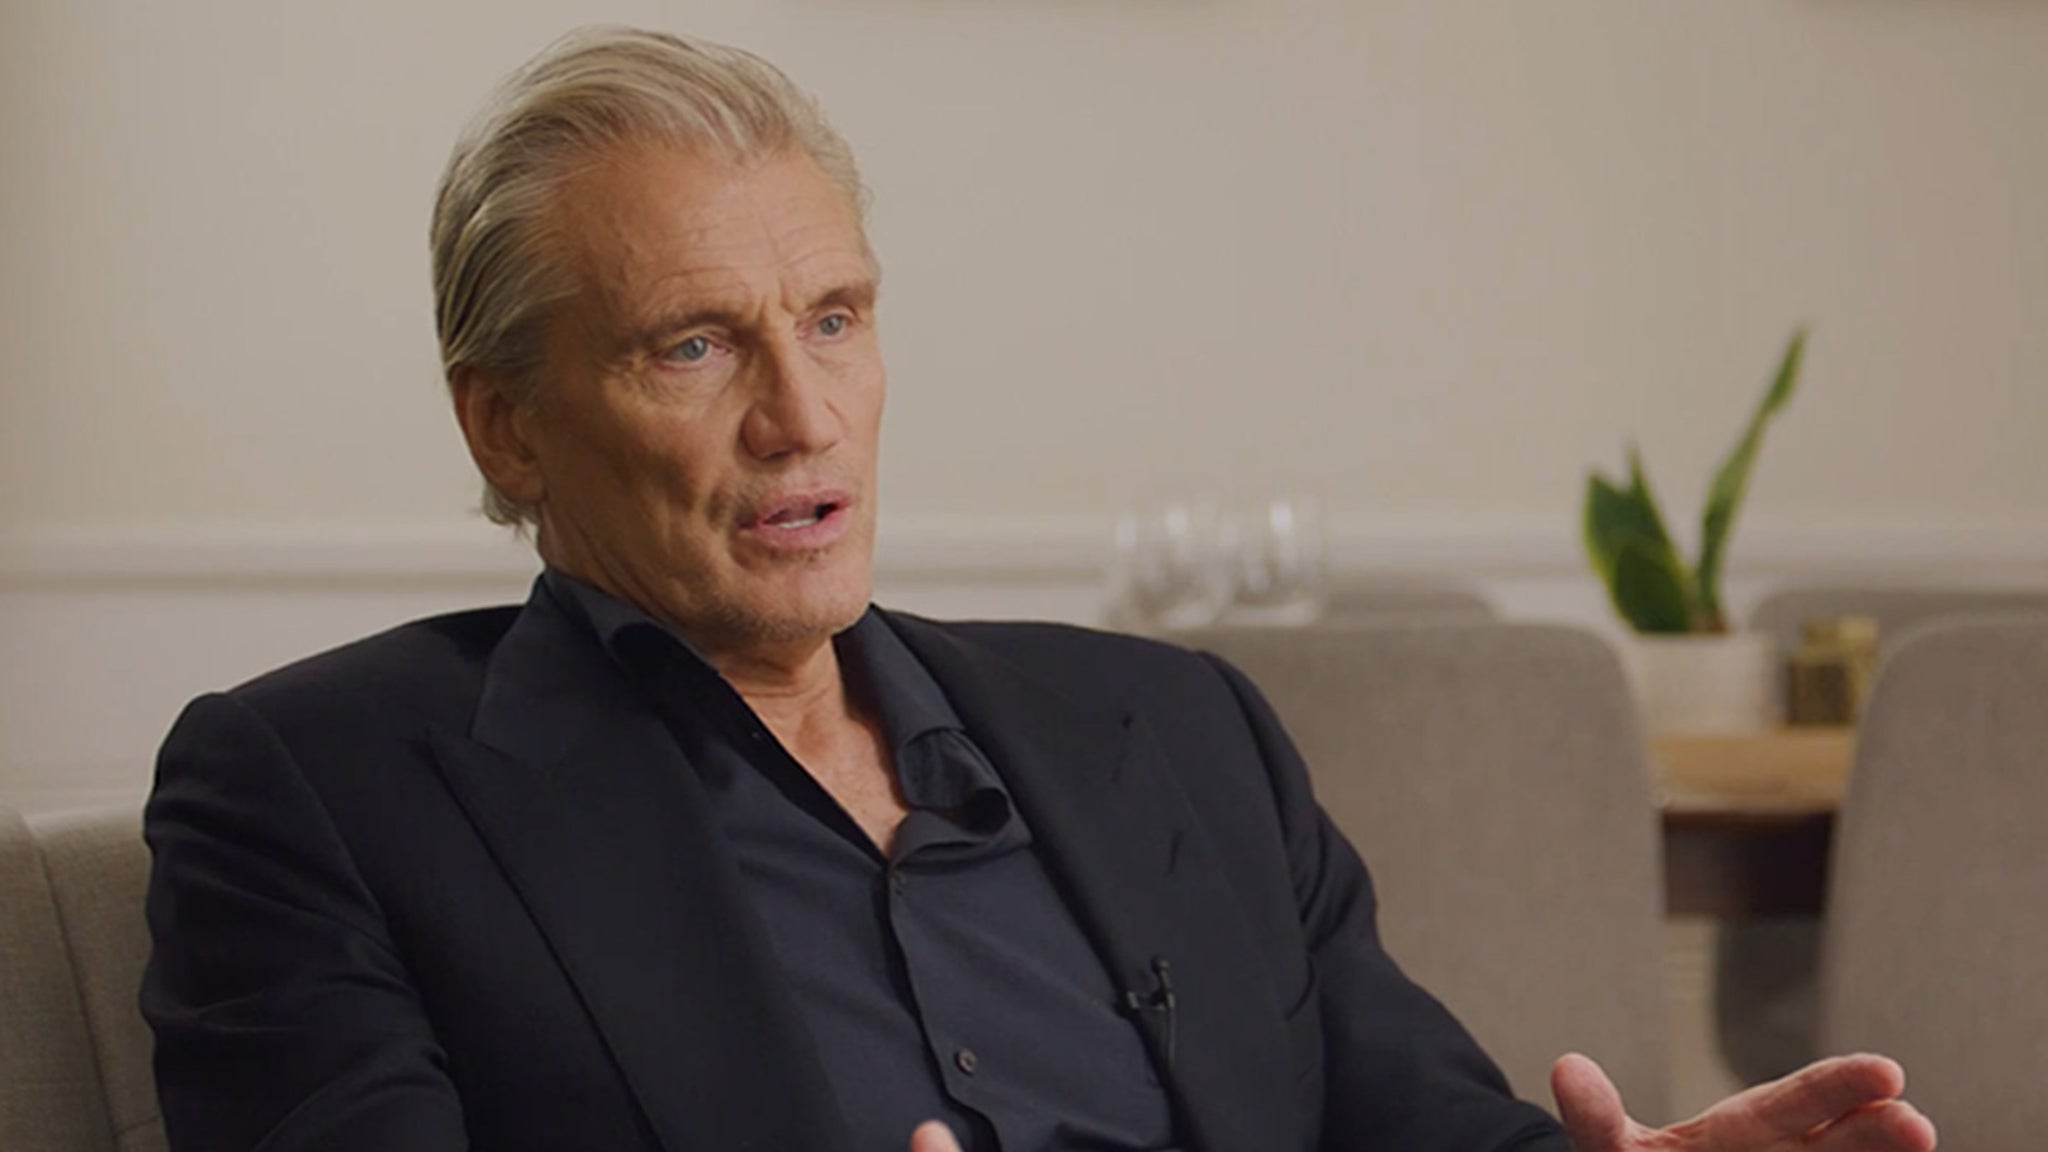 Dolph Lundgren reveals he's been battling cancer for 8 years